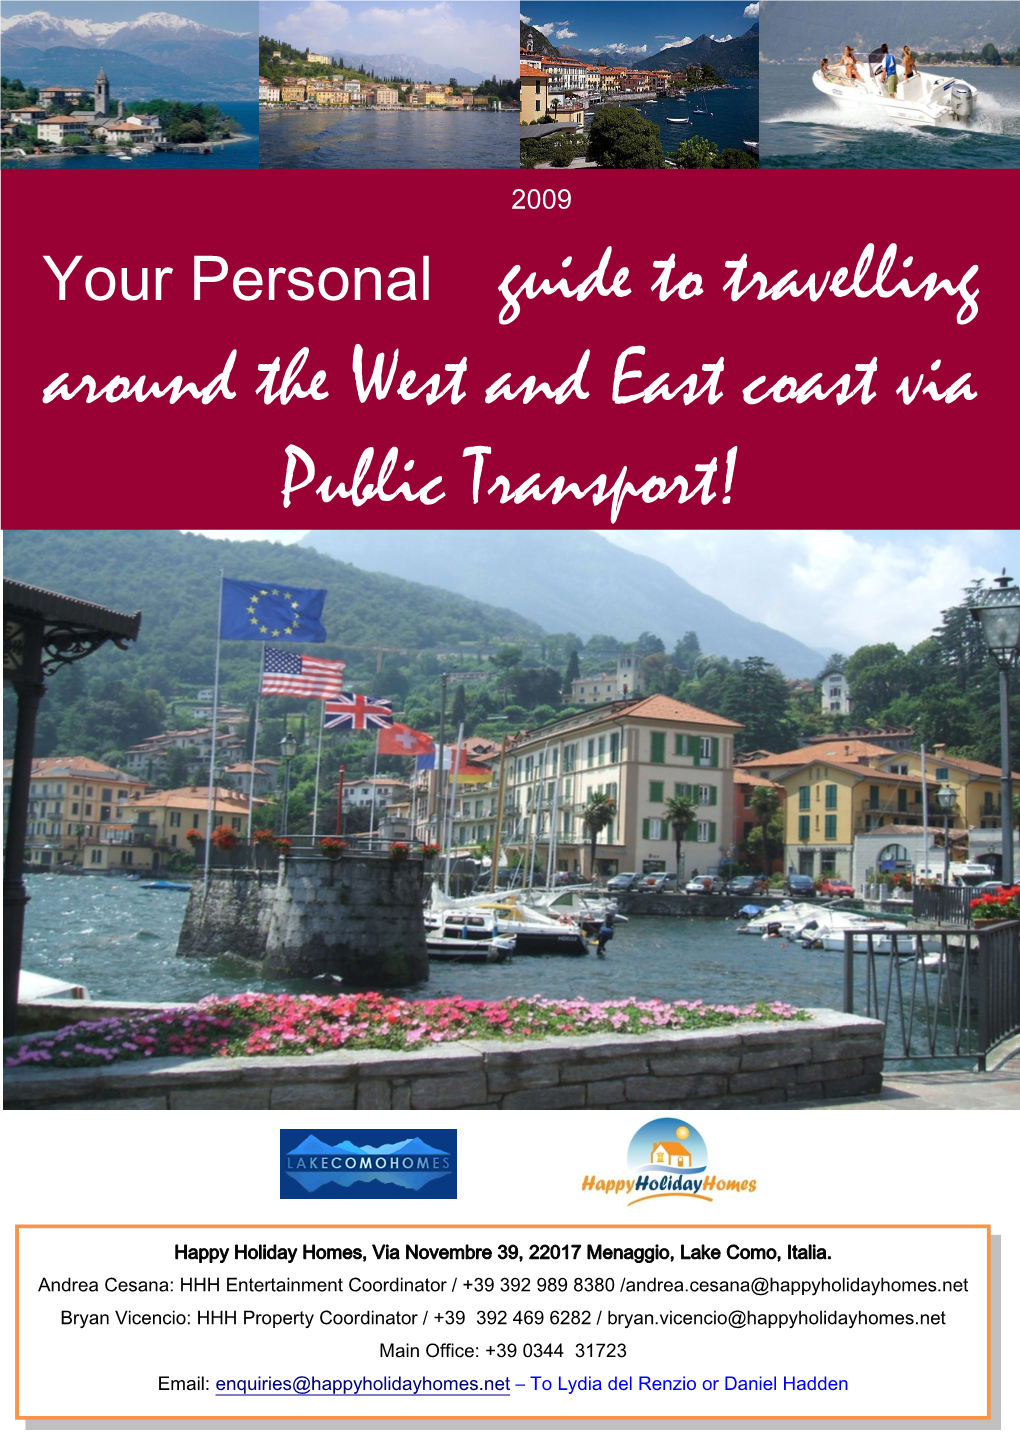 Your Personal Guide to Travelling Around the West and East Coast Via Public Transport!